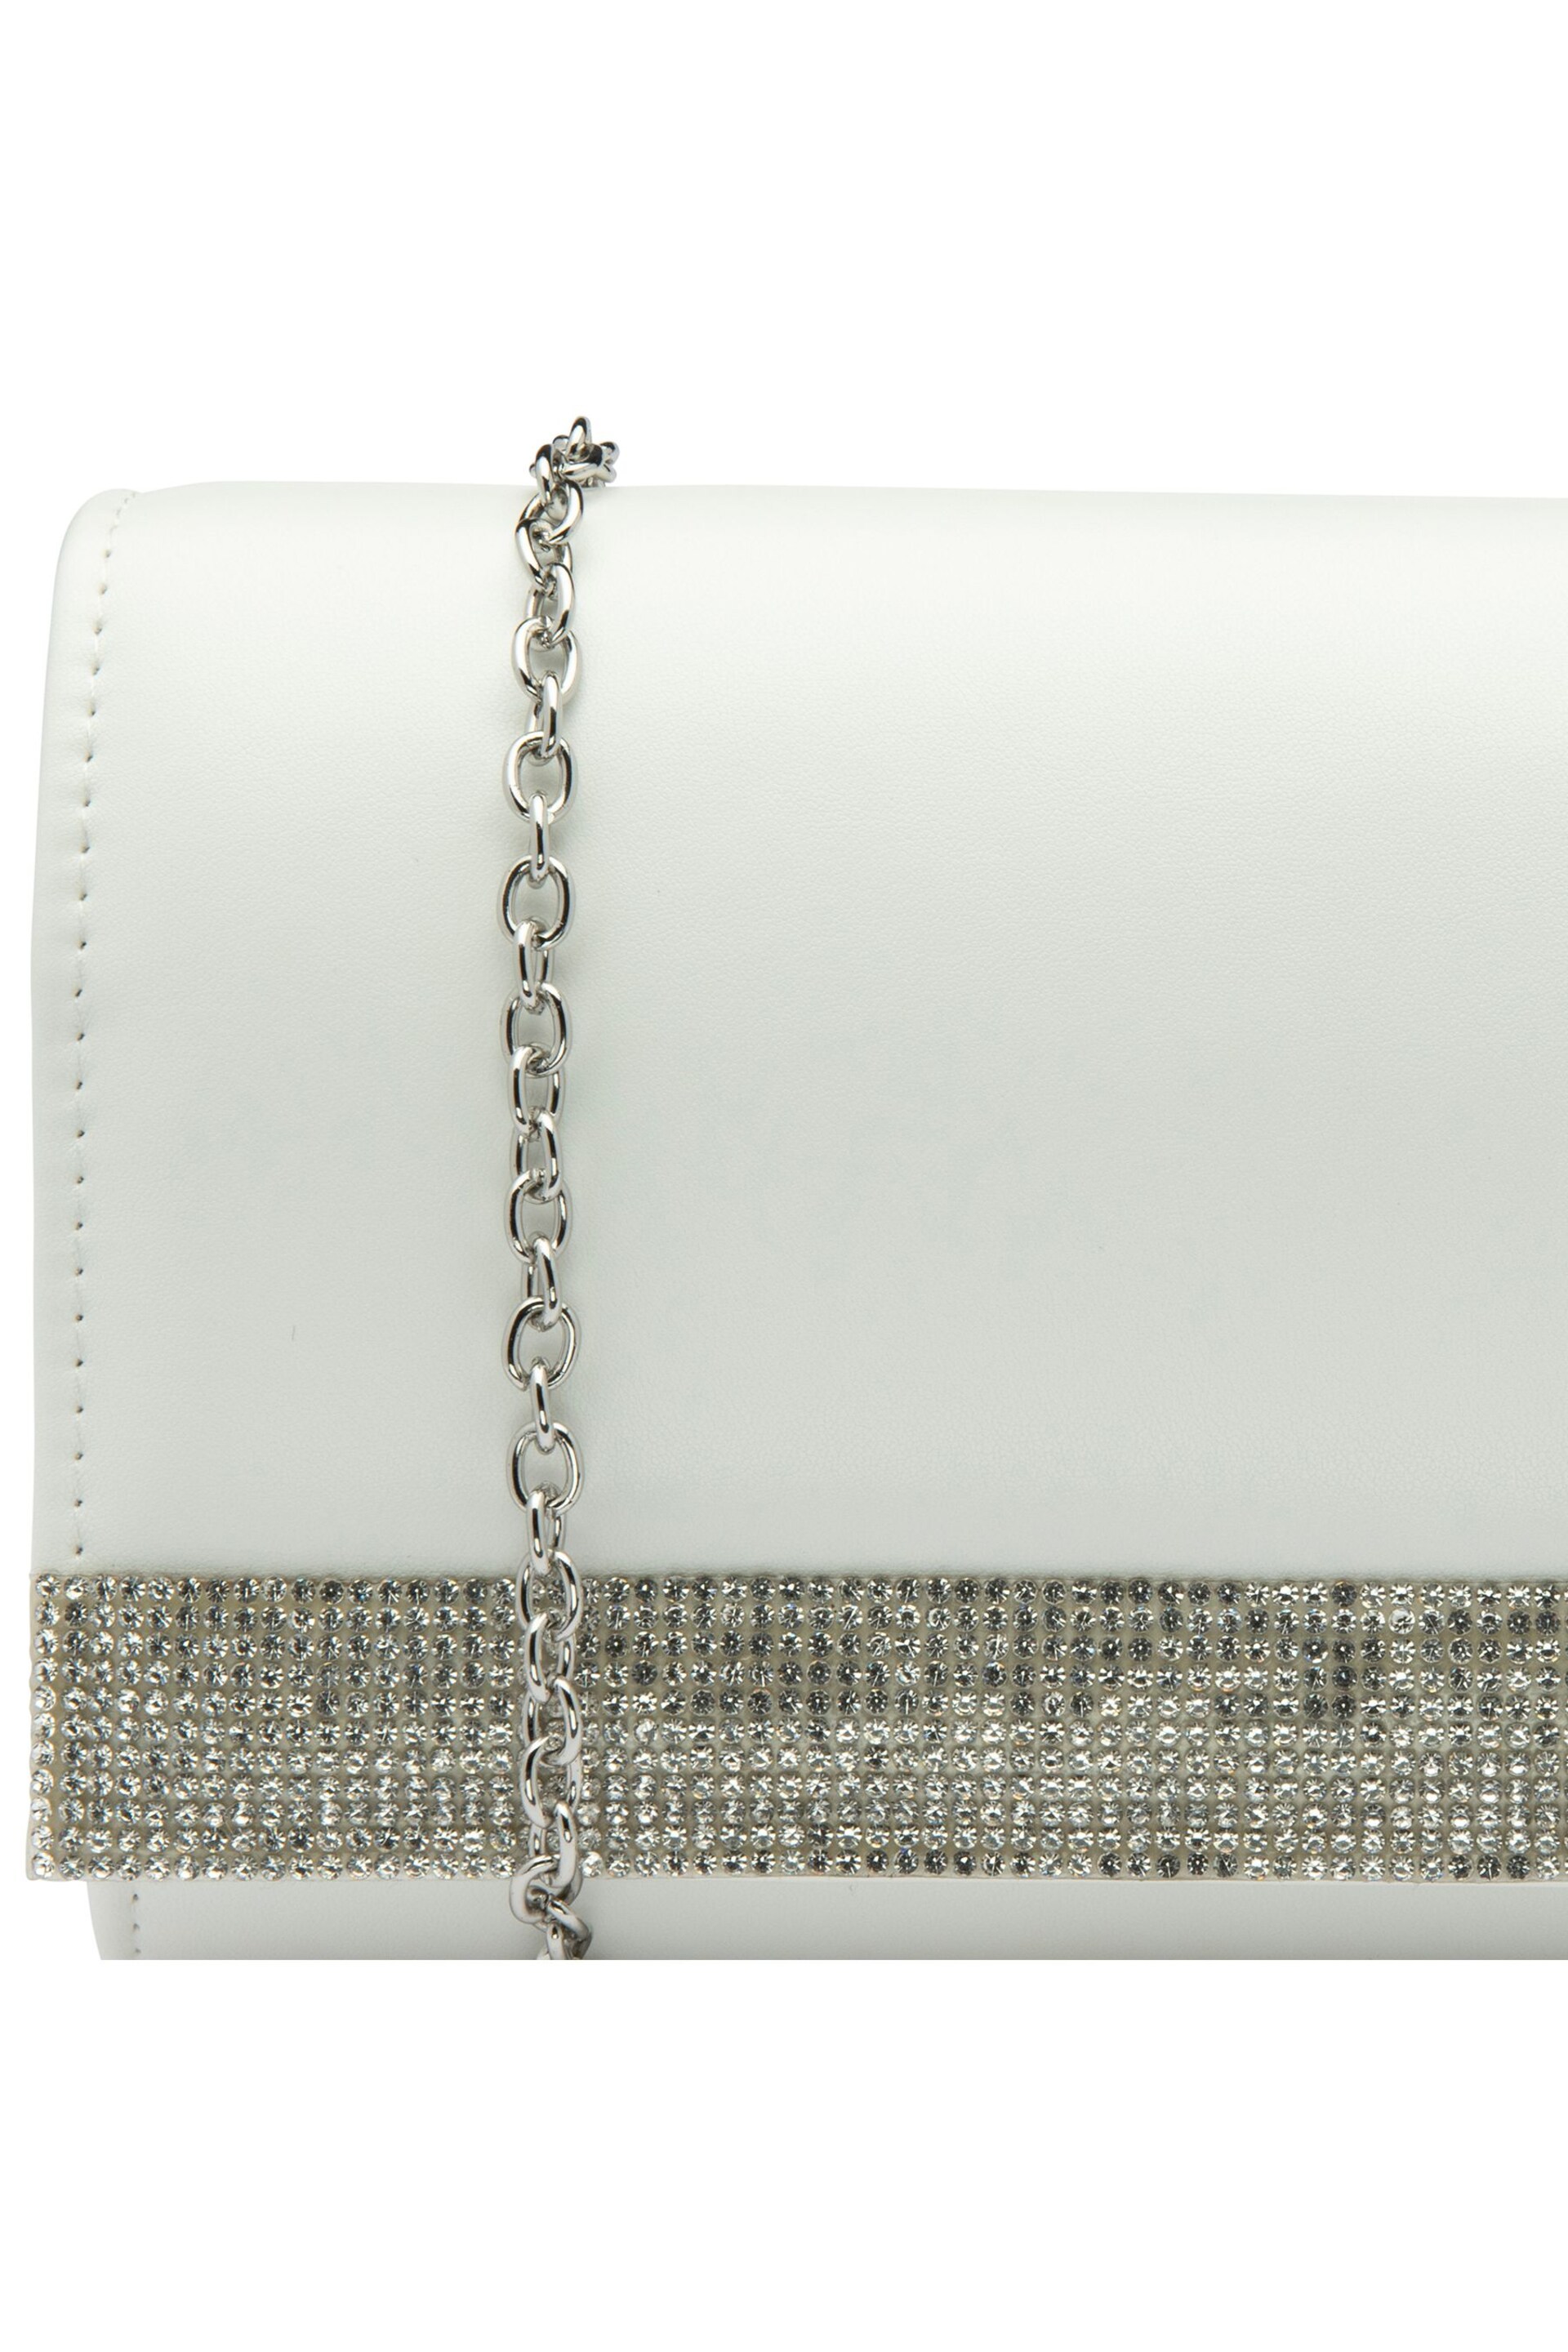 Lotus White Clutch Bag With Chain - Image 3 of 4